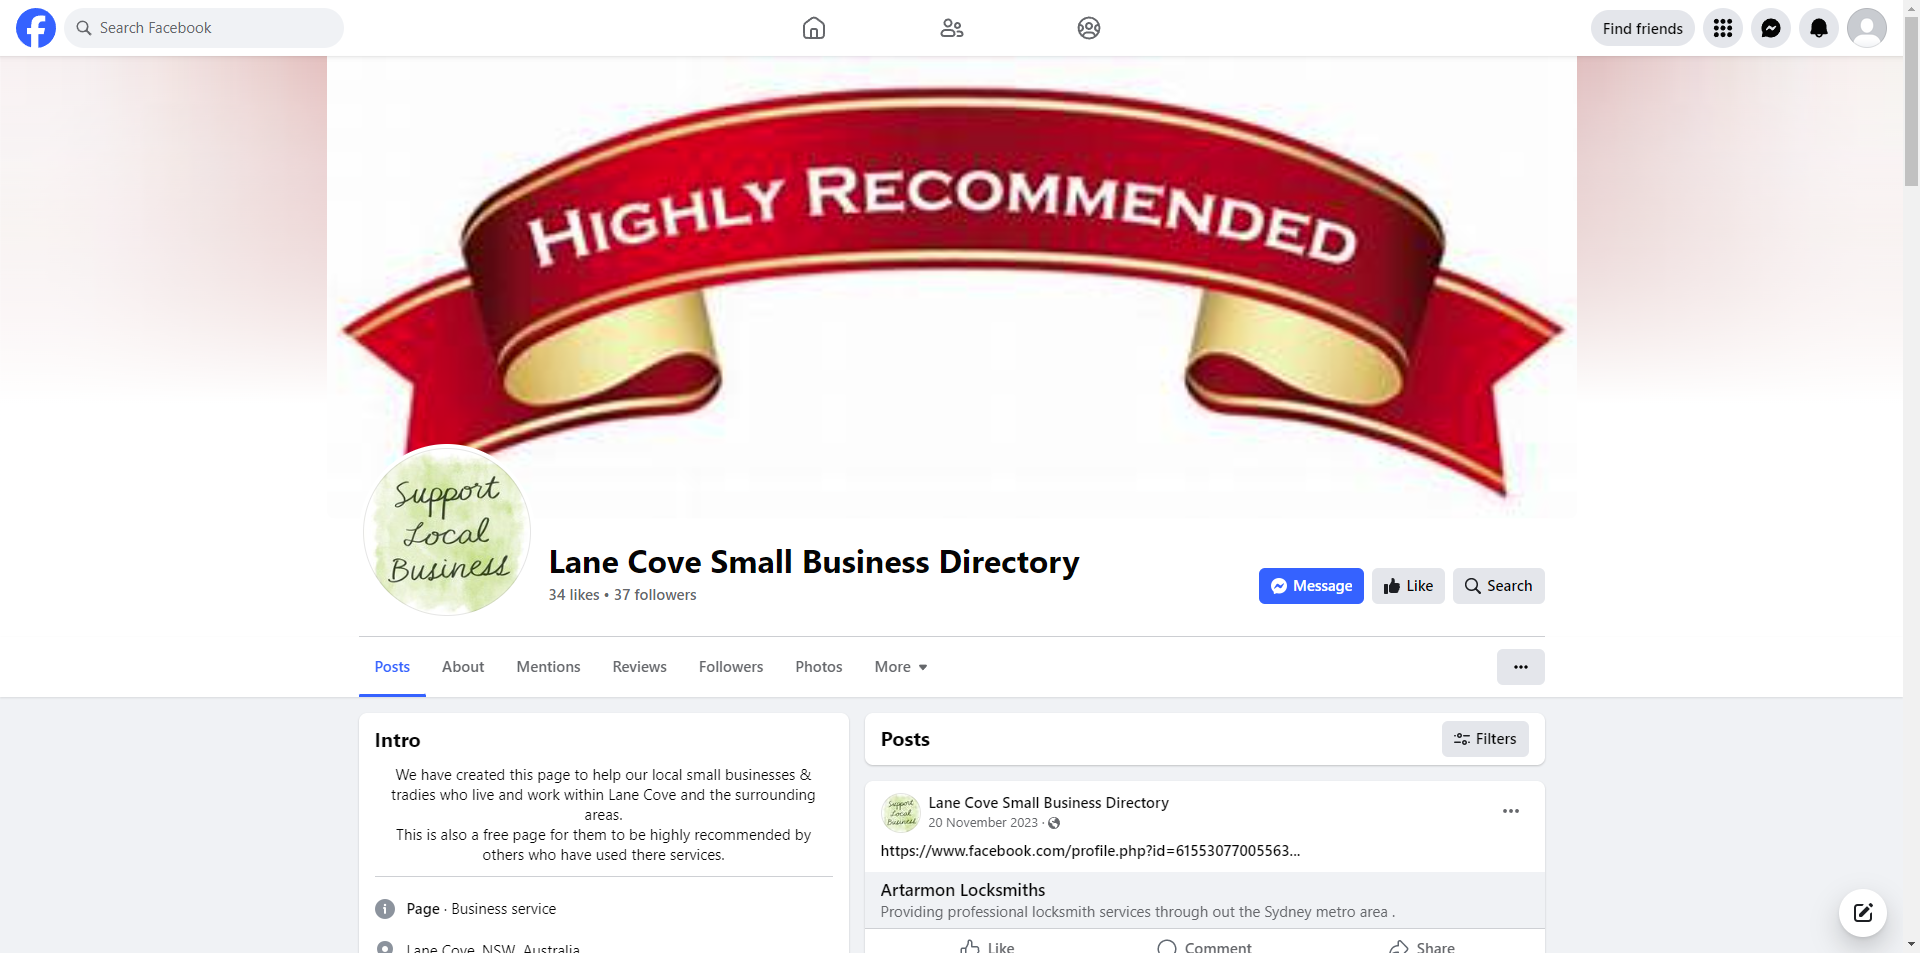 Lane Cove Small Business Directory